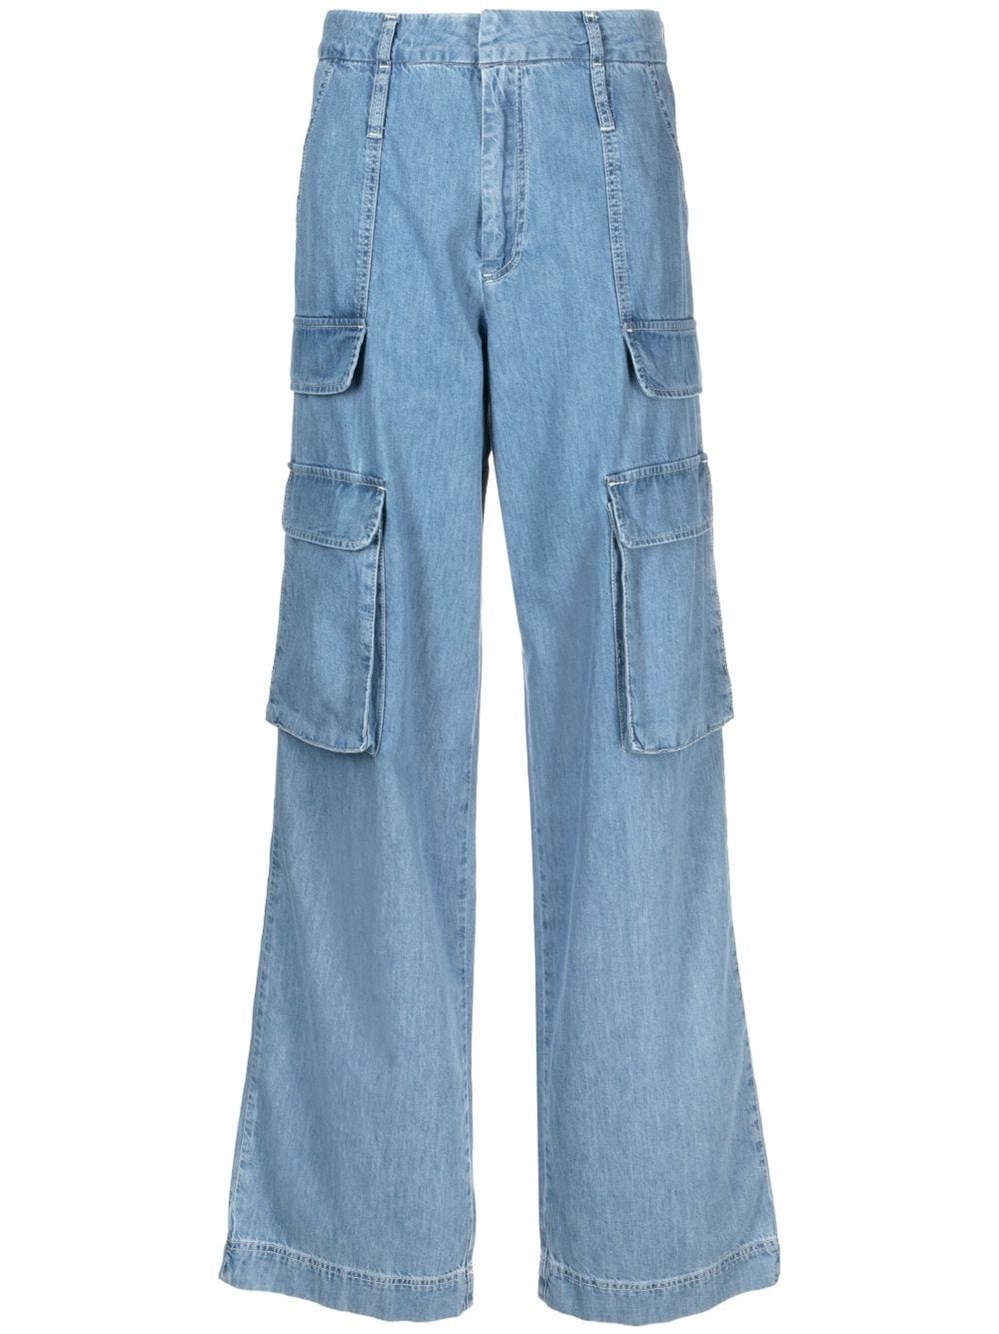 FRAME MID RISE WIDE LEG JEANS